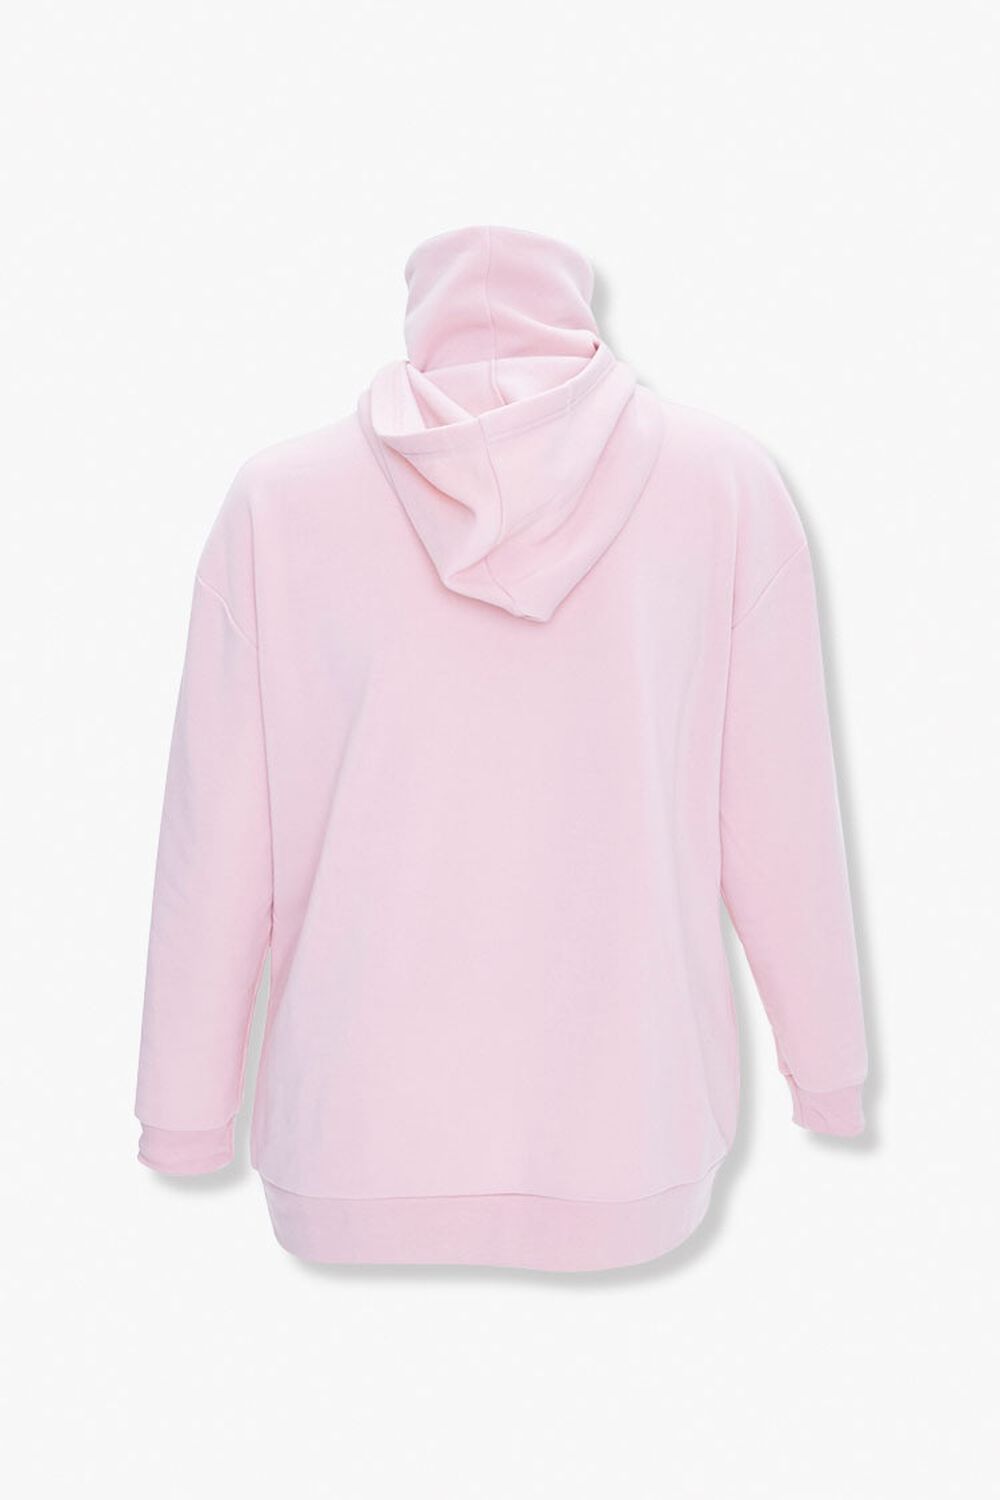 LIGHT PINK Plus Size Face Mask Hoodie, image 3